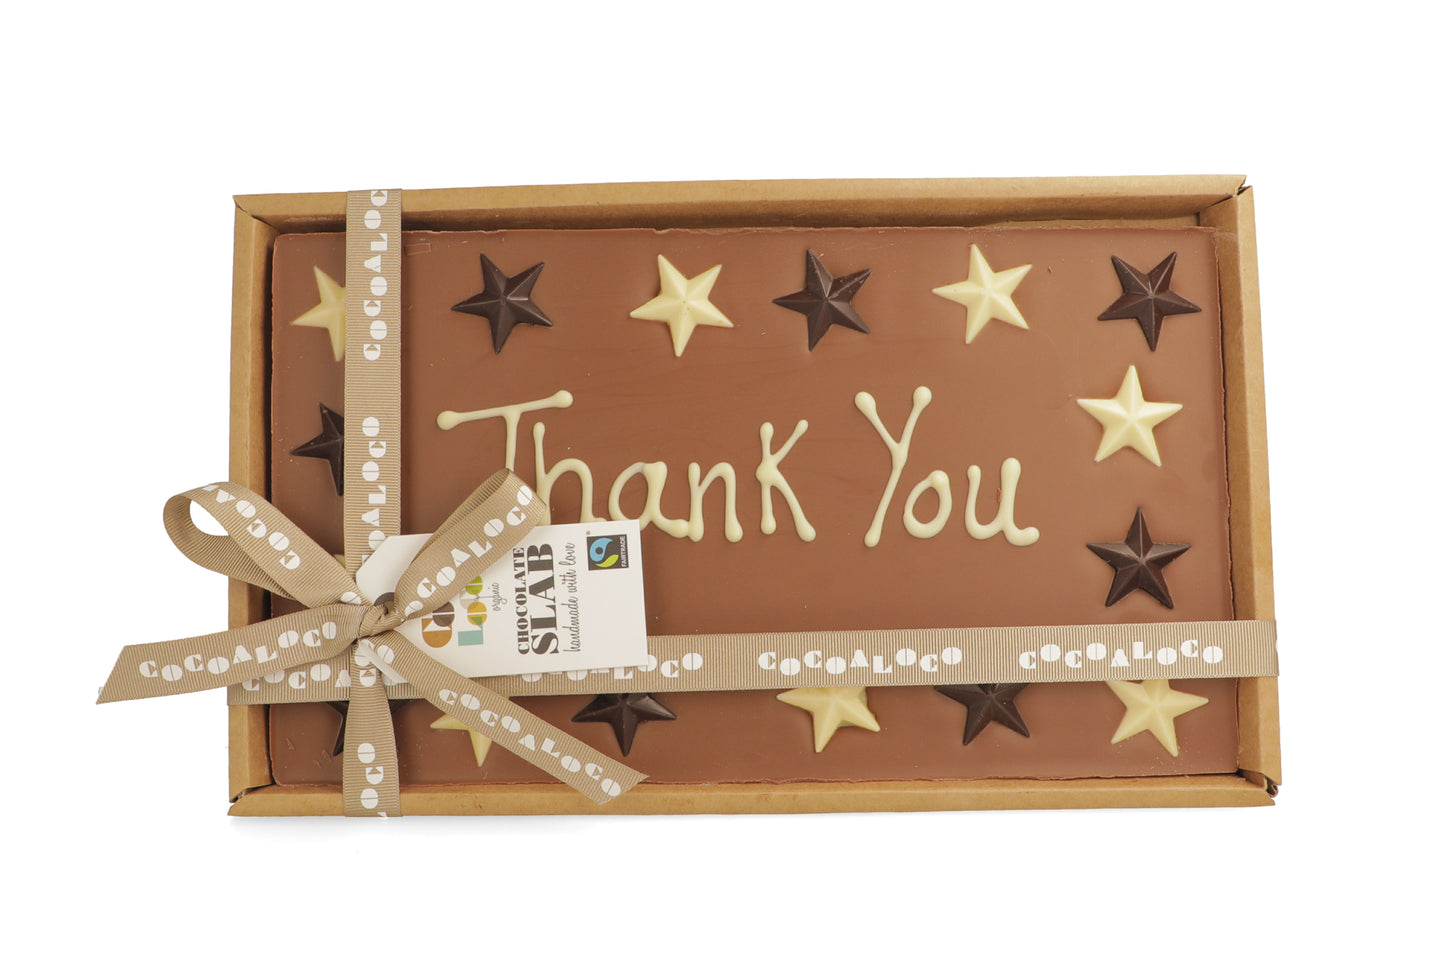 'Thank You' 500g Message Slab